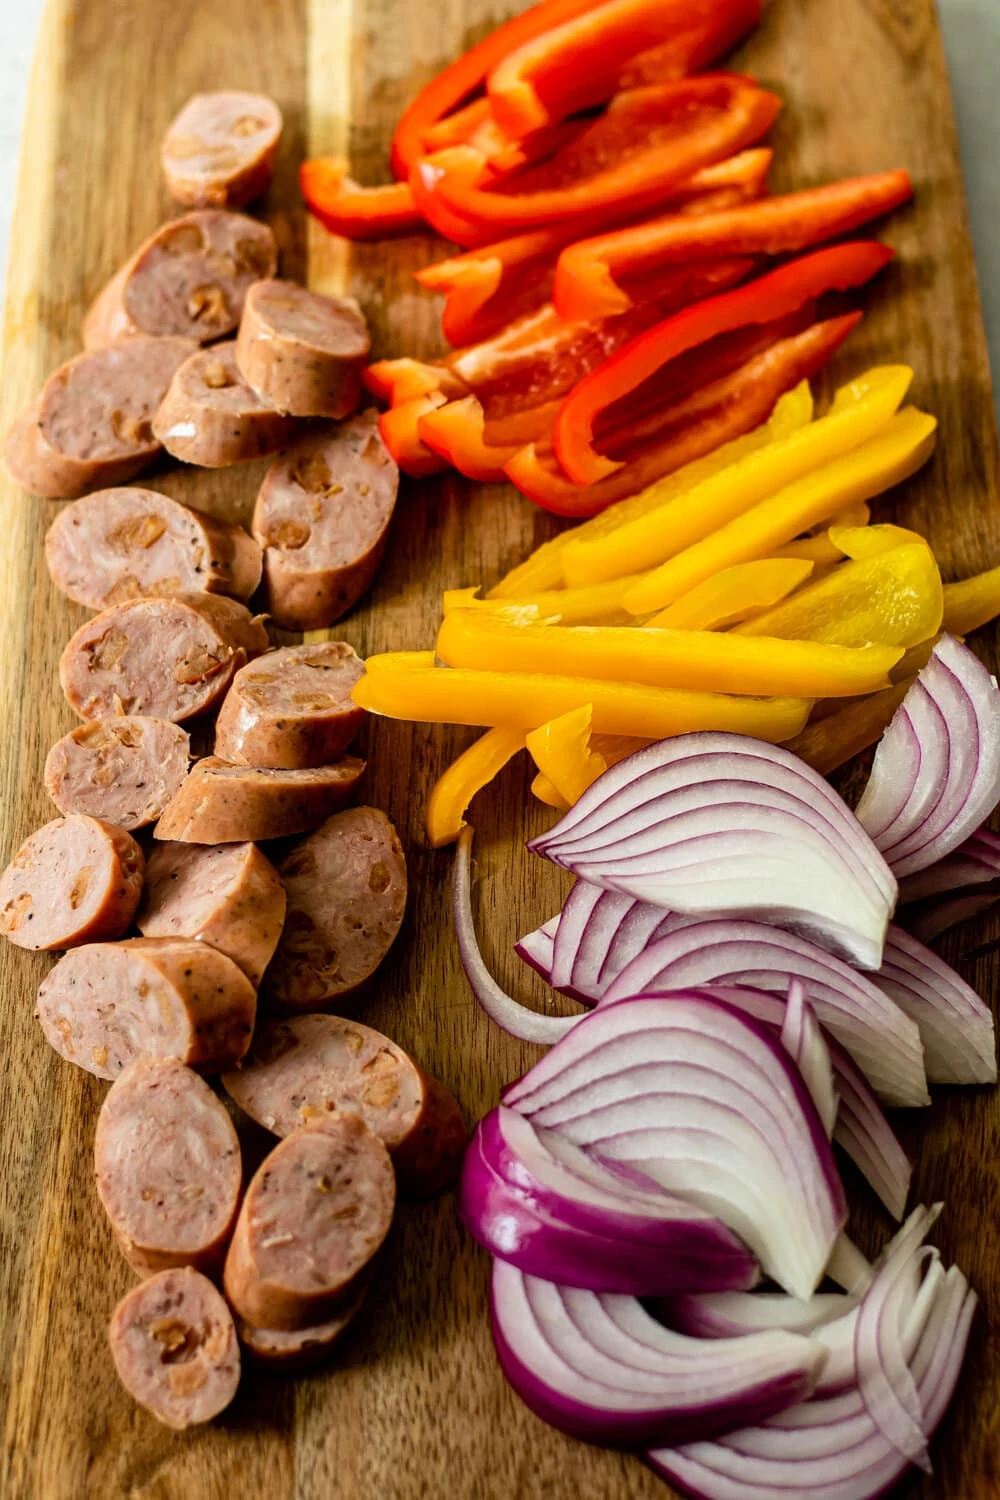 Easy Sausage and Pepper Skillet (Whole30, Paleo, Gluten-Free)